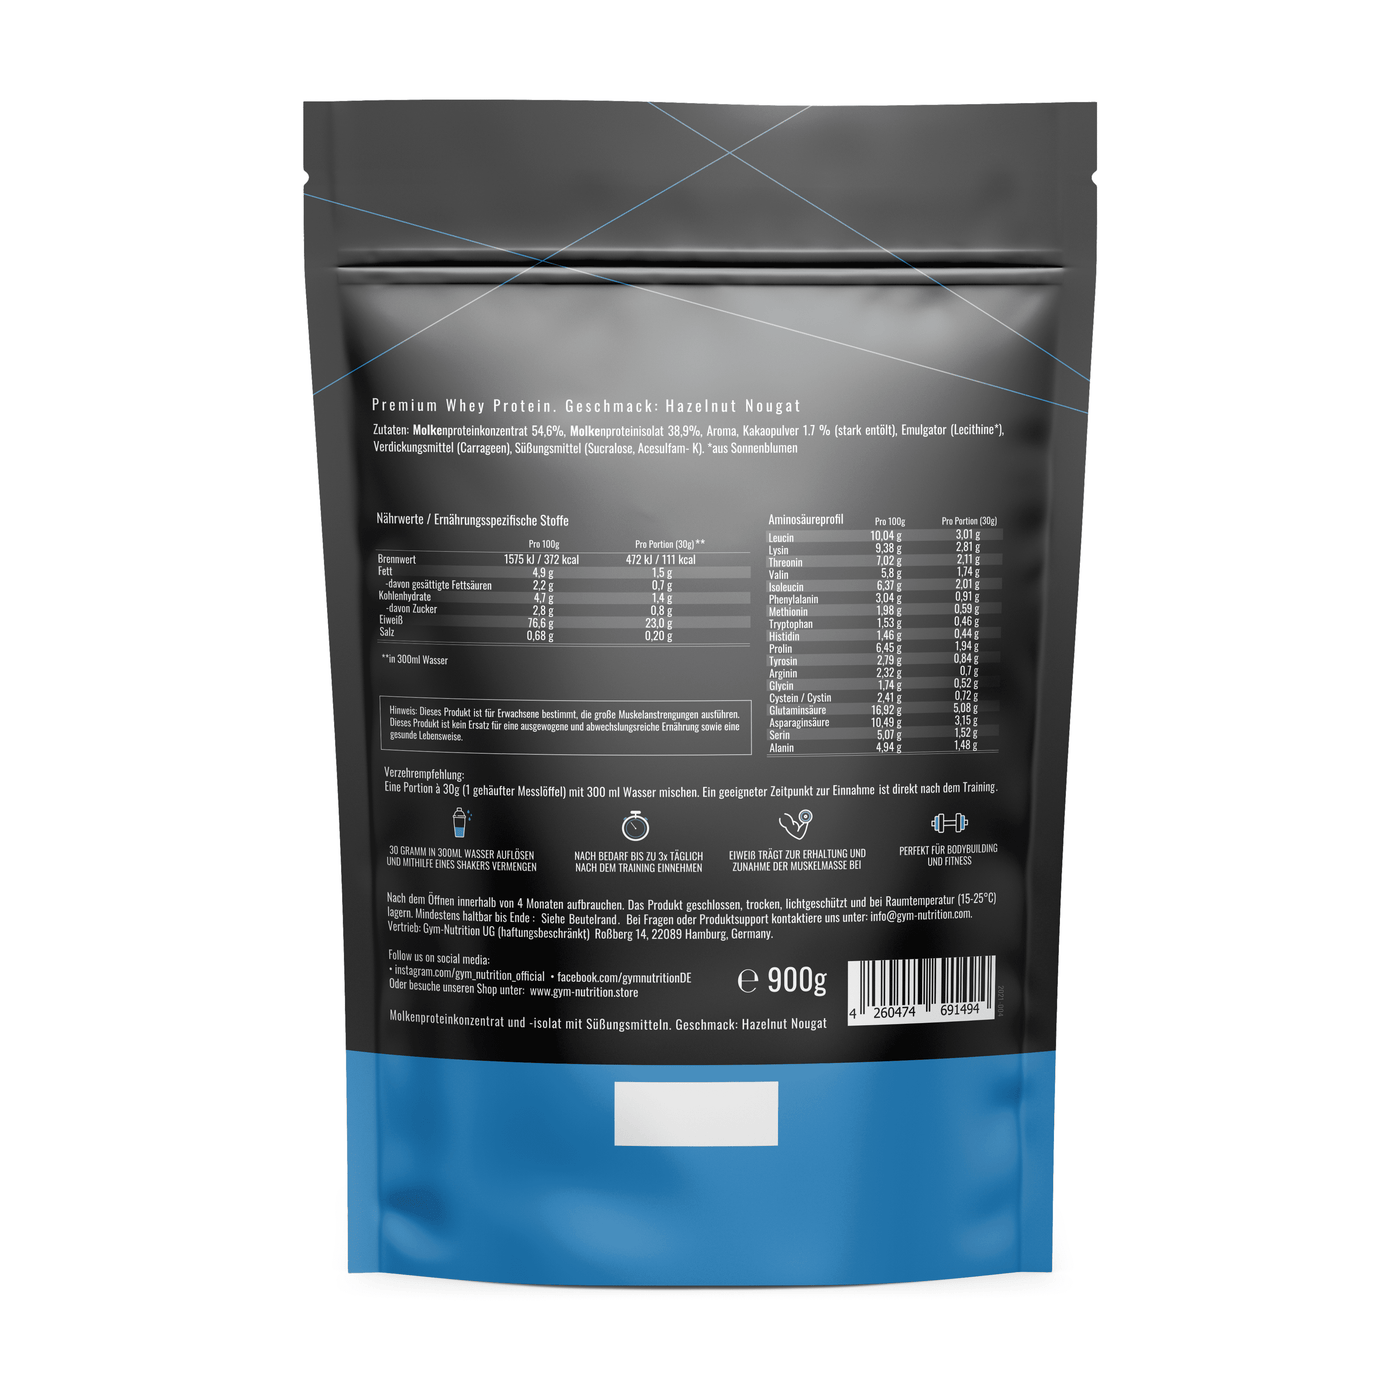 Premium Whey Protein - Laboratory tested - Bottled in Germany / With the highest isolate content on the market